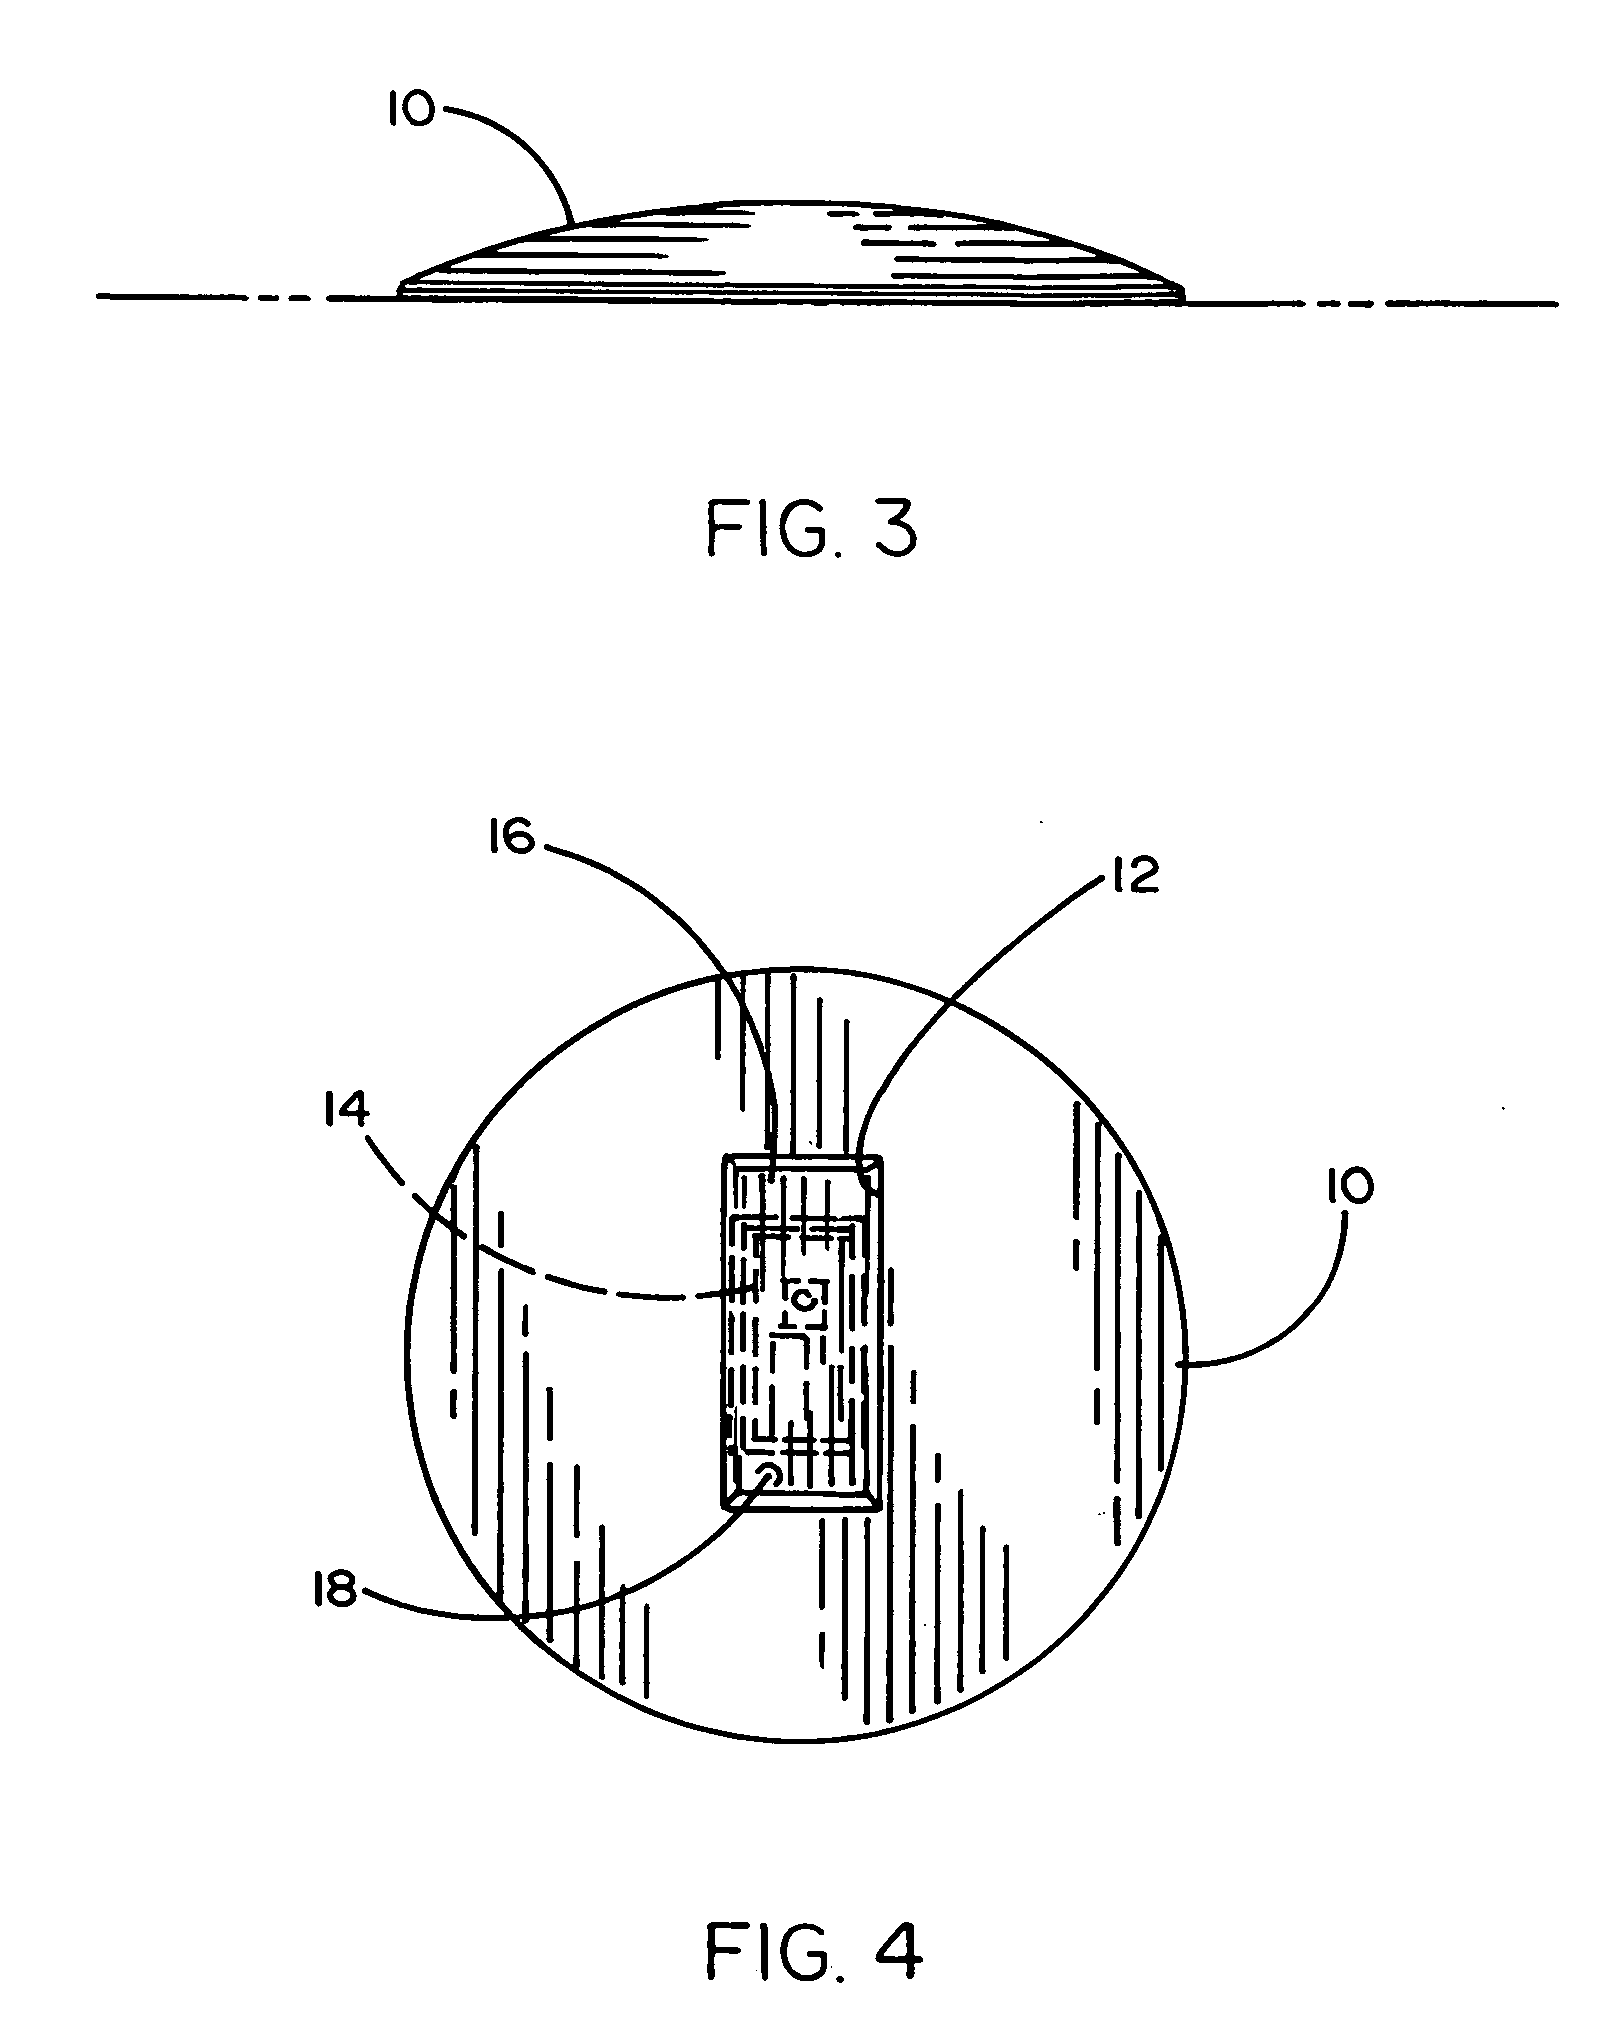 Apparatus and method for fine art authentication